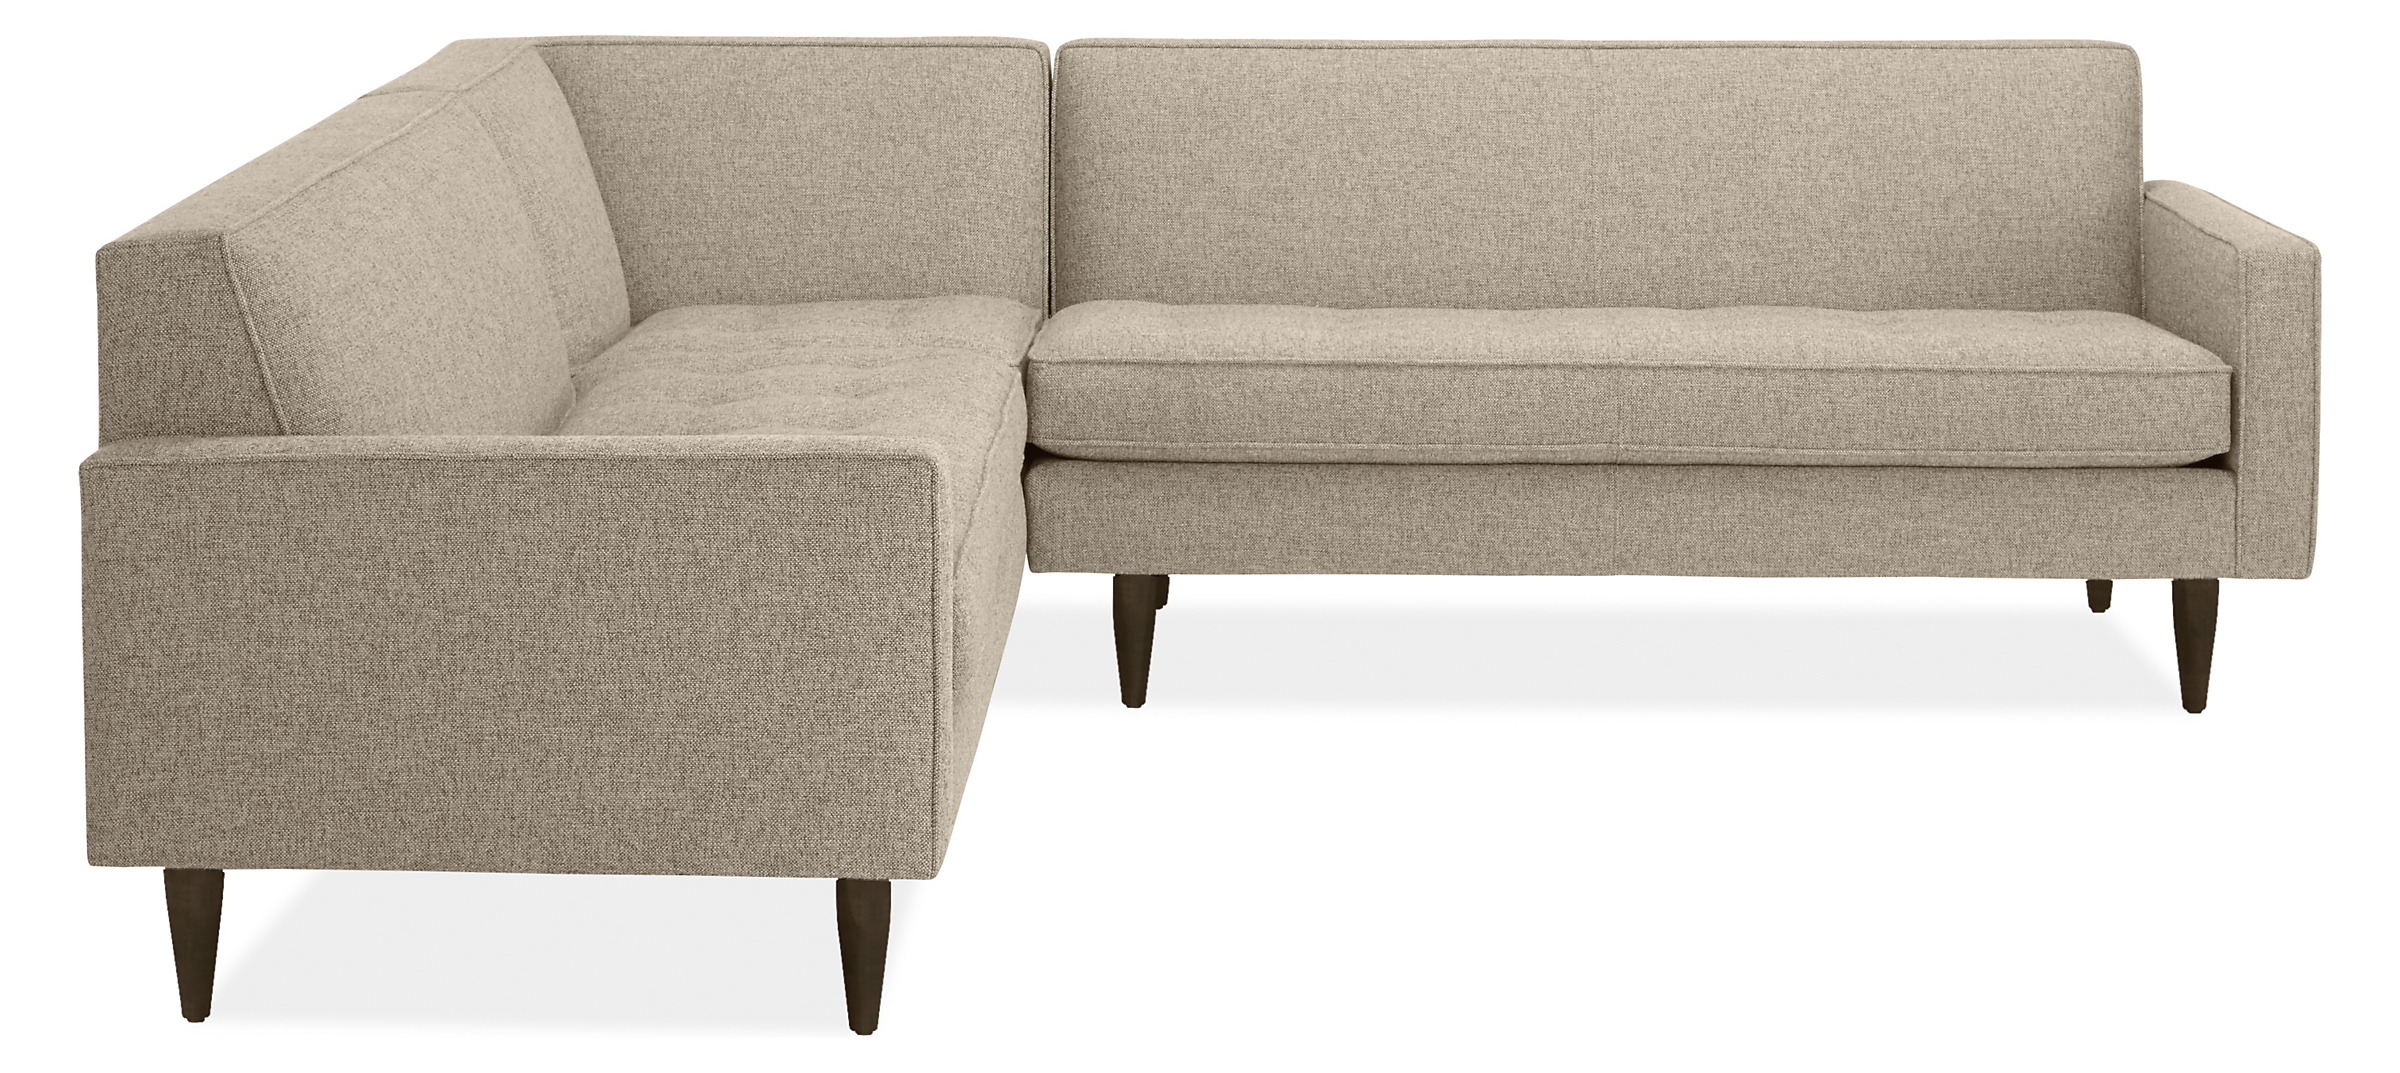 Reese 98x98" Three-Piece Sectional with Corner